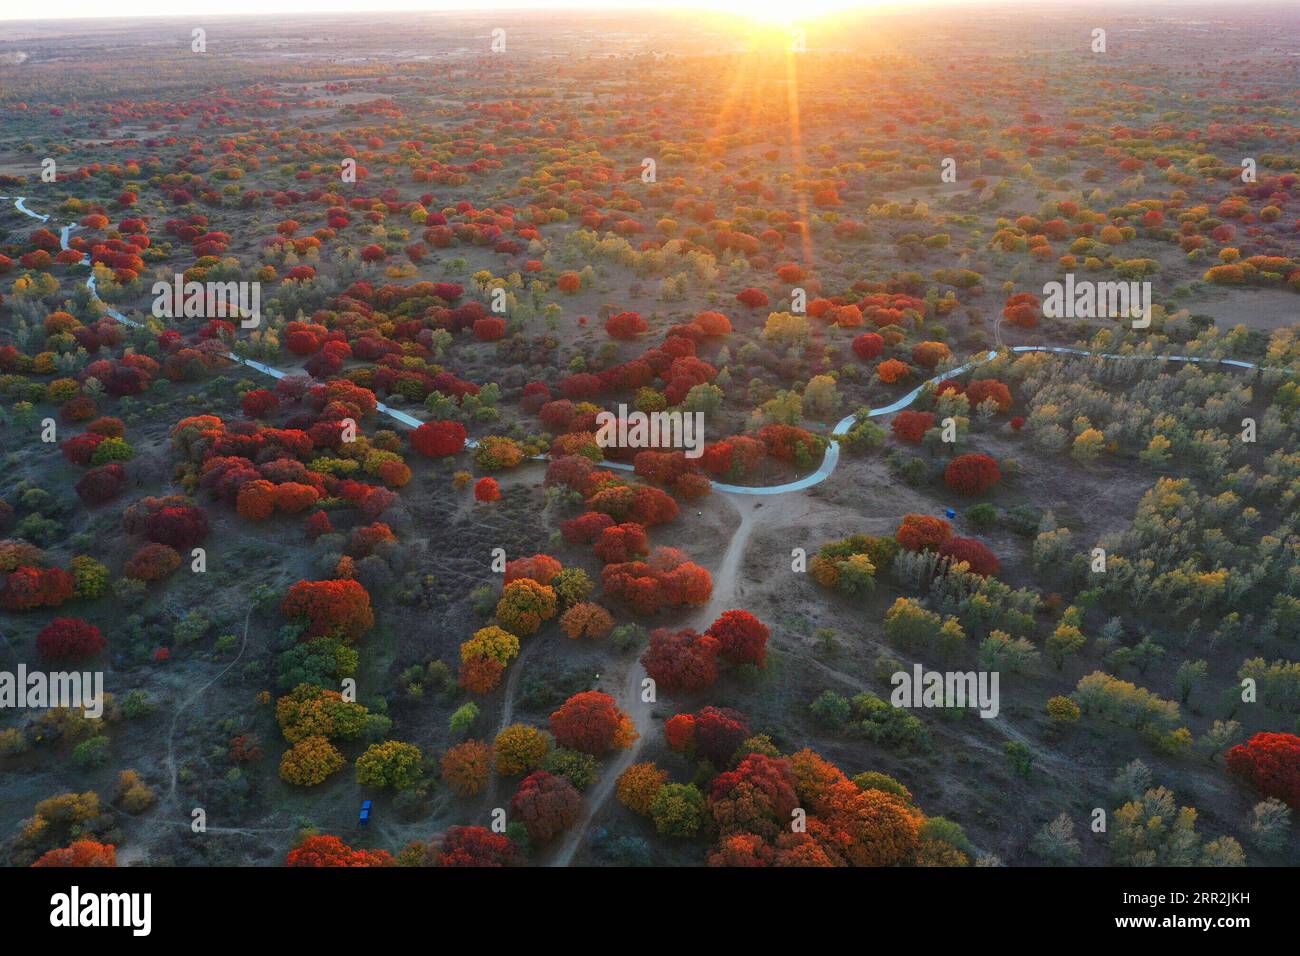 China, Herbstimpressionen aus dem Daqinggou Naturreservat 201013 -- TONGLIAO, Oct. 13, 2020 -- Aerial photo taken on Oct. 12, 2020 shows the autumn scenery of Daqinggou national reserve in Horqin Left Wing Rear Banner of north China s Inner Mongolia Autonomous Region.  CHINA-INNER MONGOLIA-HORQIN-SCENERY CN LiuxYide PUBLICATIONxNOTxINxCHN Stock Photo